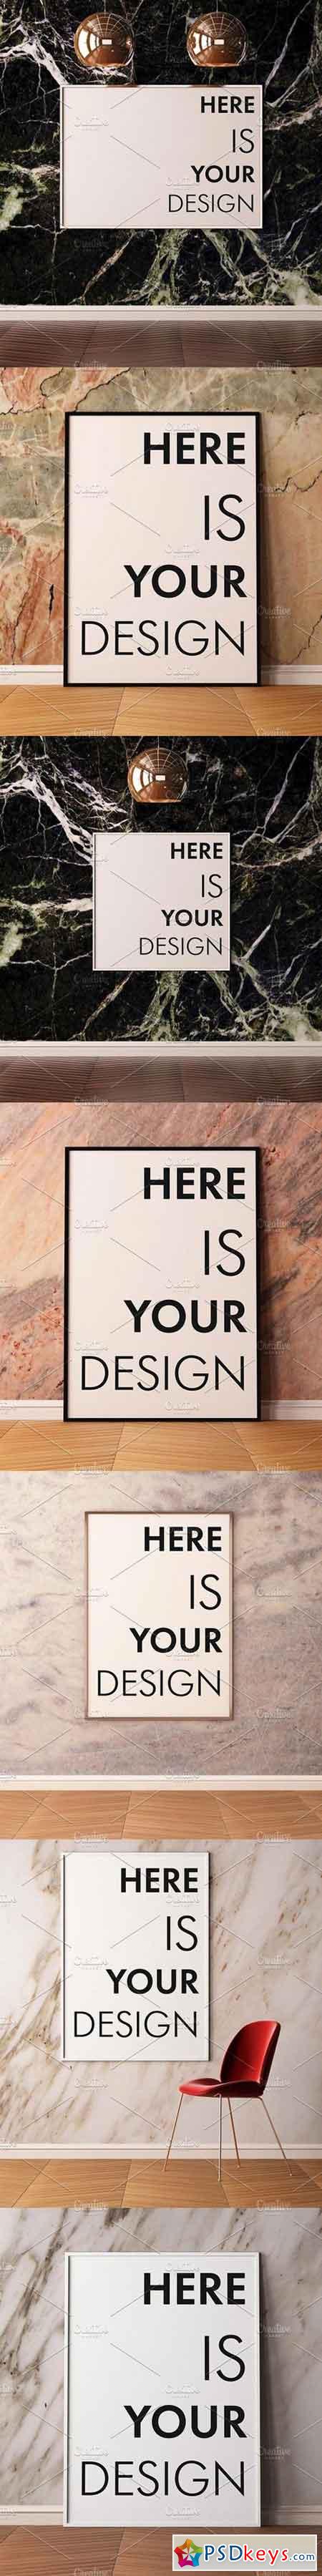 Mockup posters on a marble wall 1518244